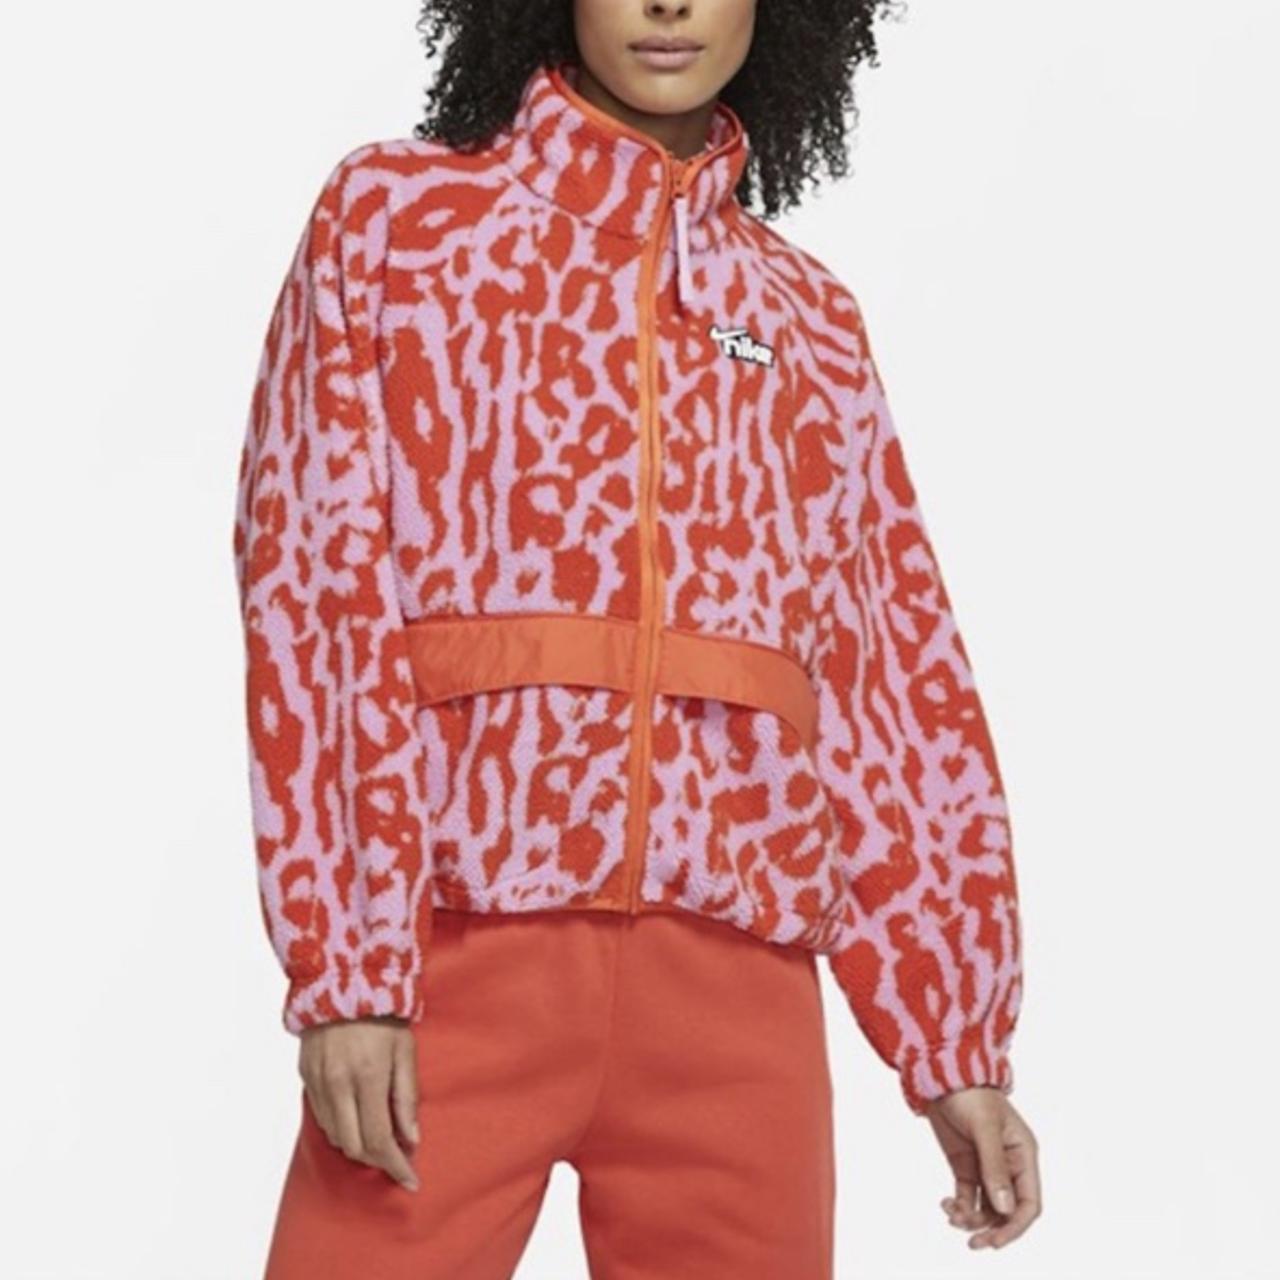 WANTED!!, Nike Sherpa animal print jacket in S or M...